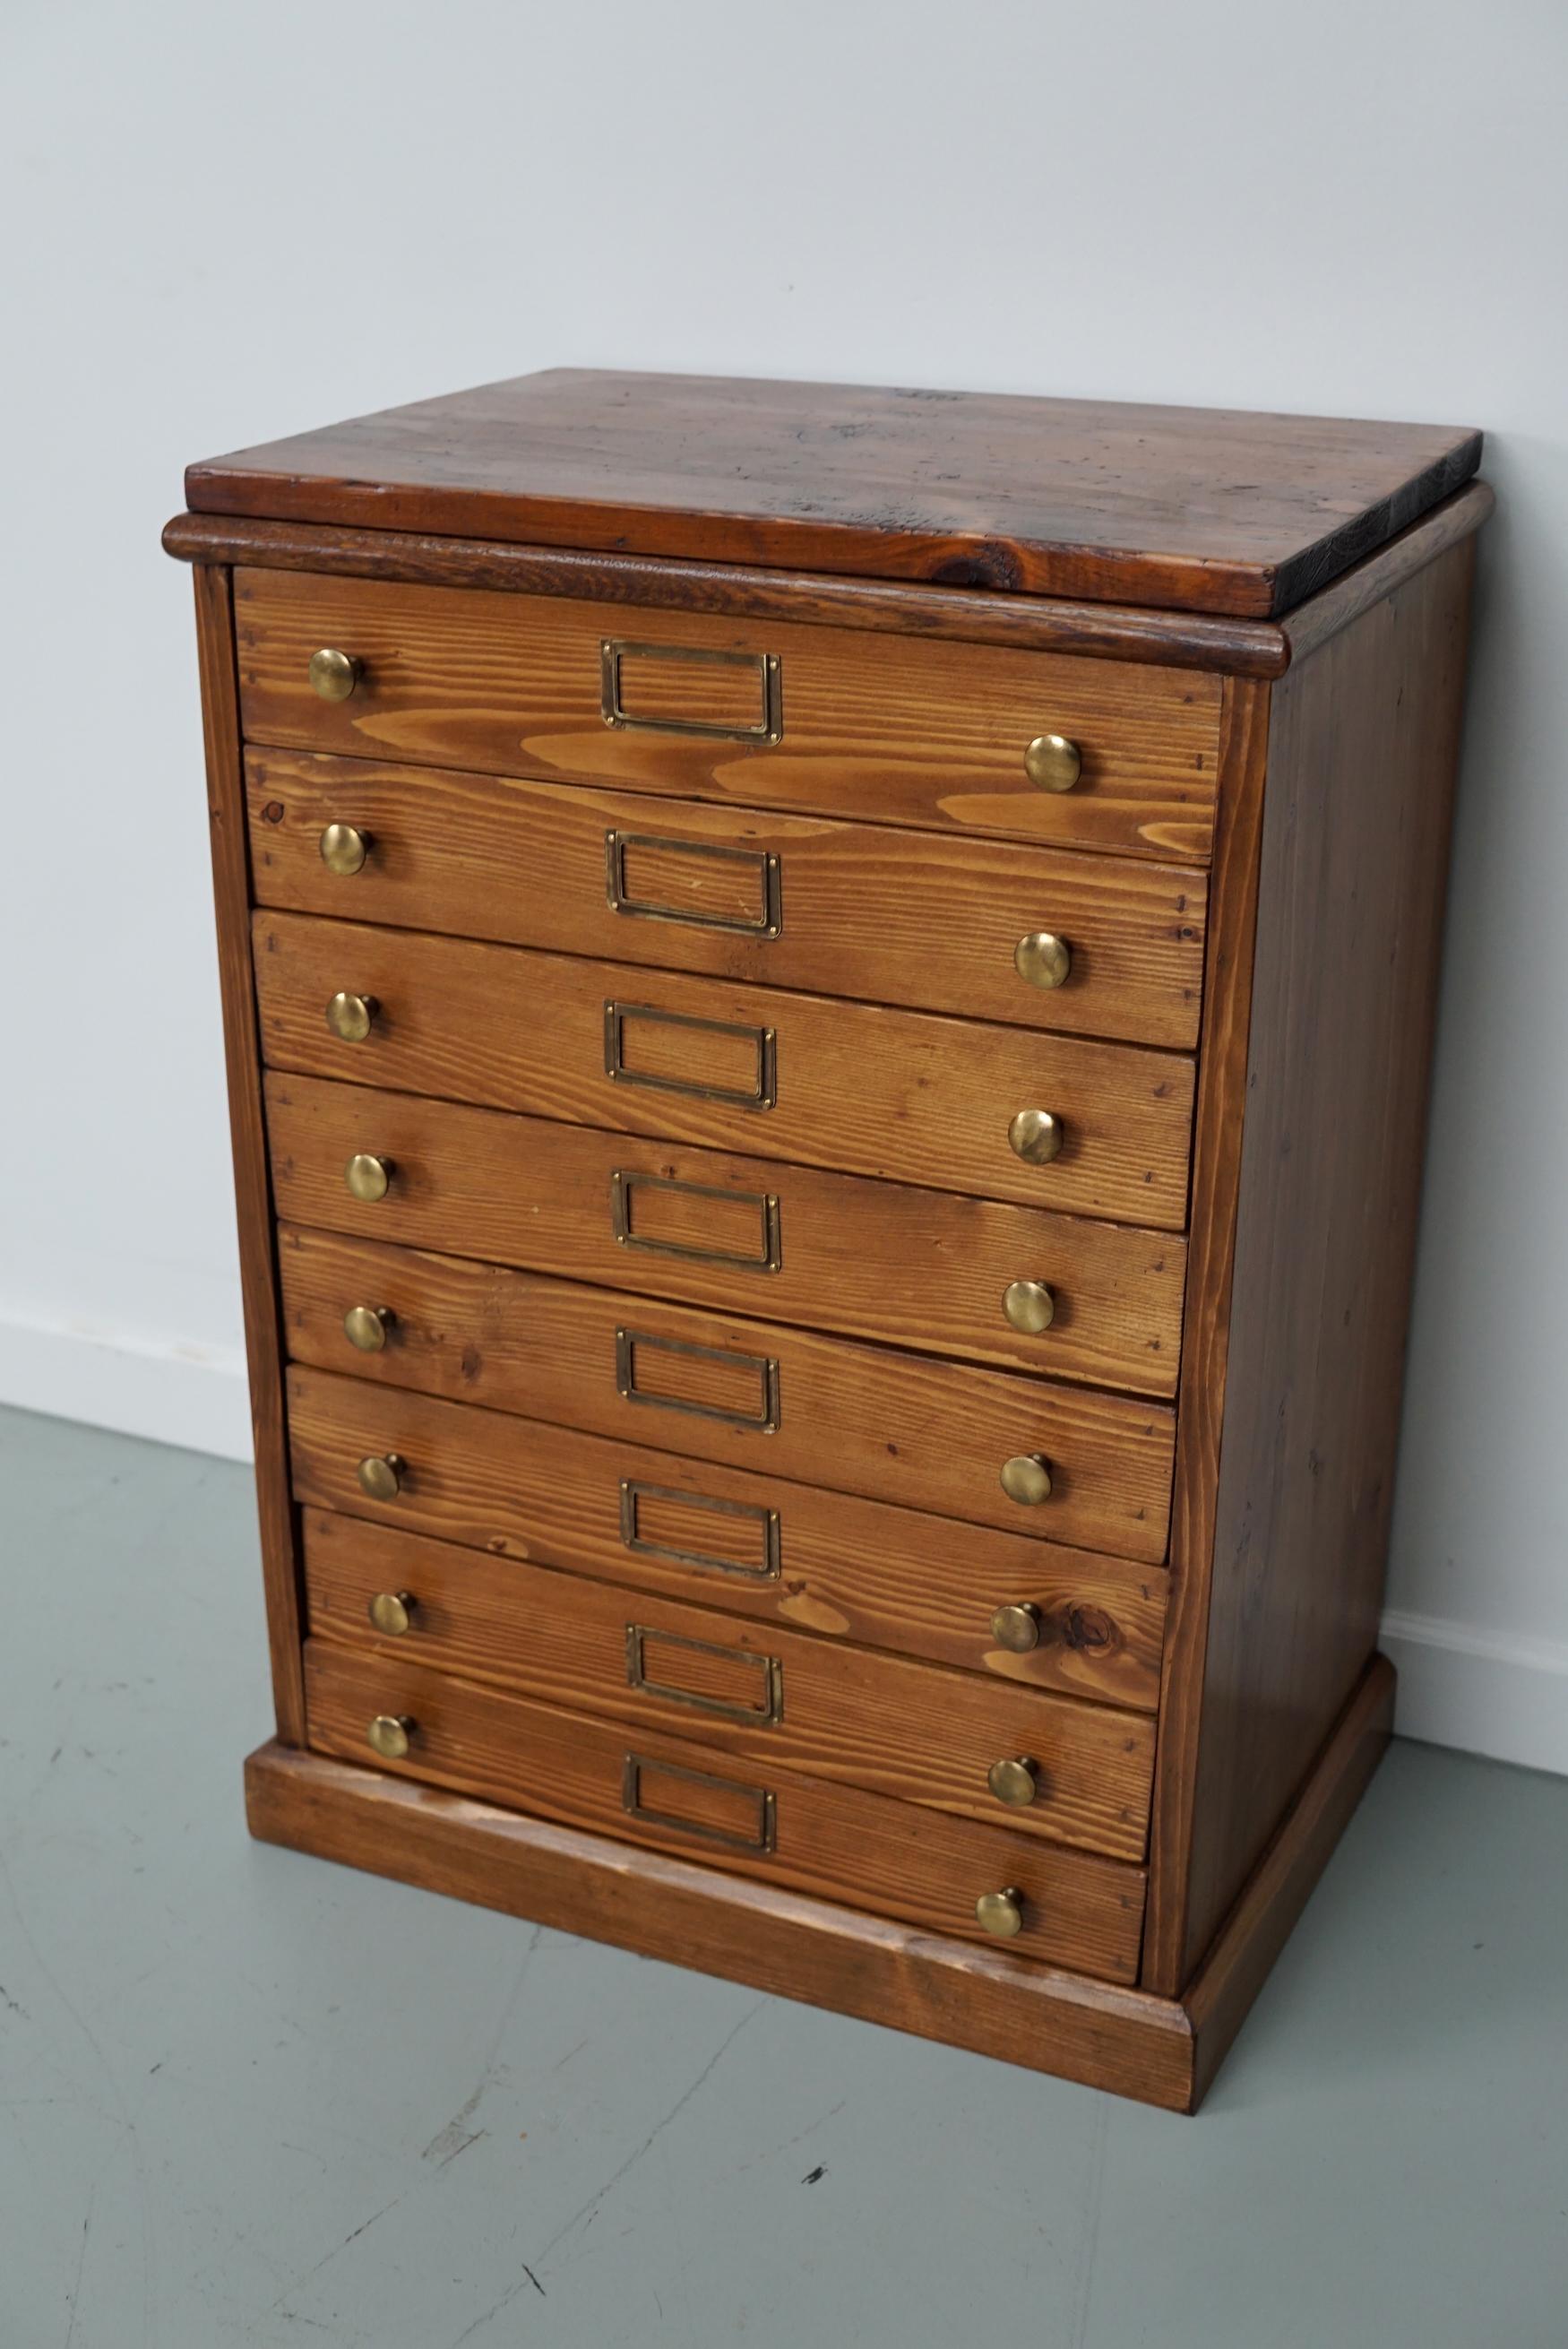 This jewelers / watchmaker cabinet was designed and made circa 1930 in the Netherlands. It features 8 pine fronted drawers with brass hardware.